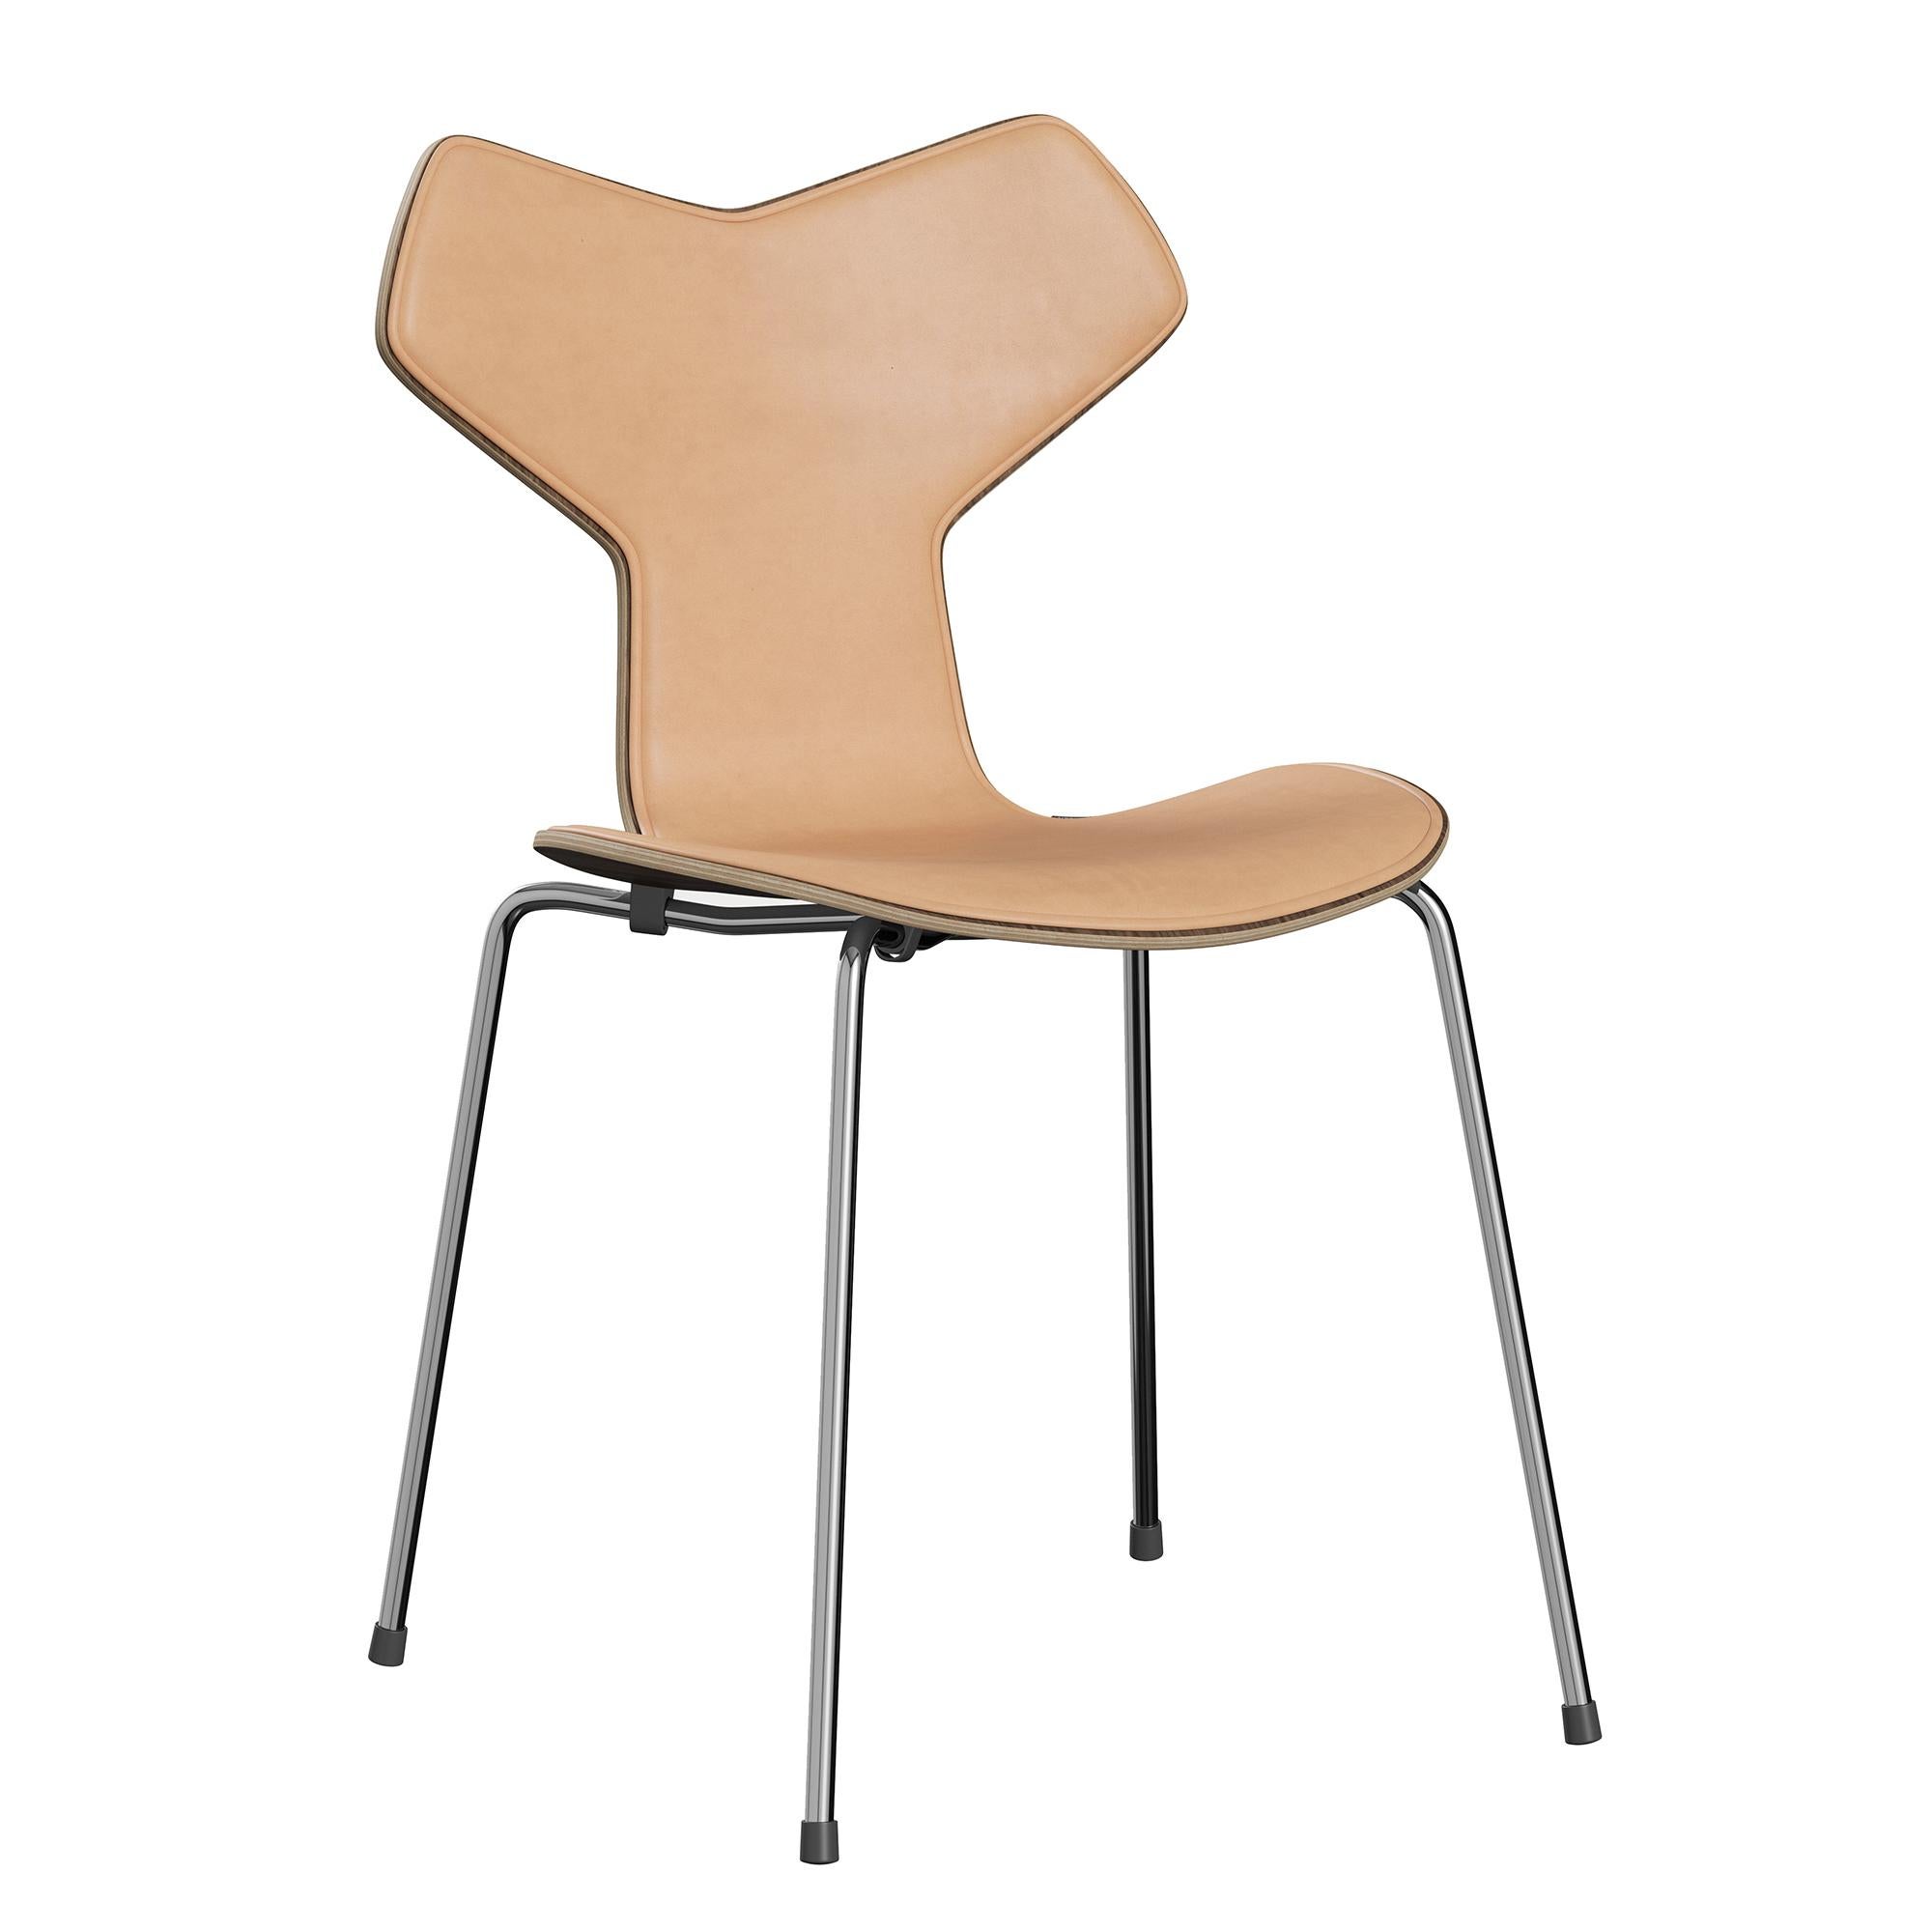 Arne Jacobsen 'Grand Prix' Chair for Fritz Hansen in Partial Leather Upholstery For Sale 7